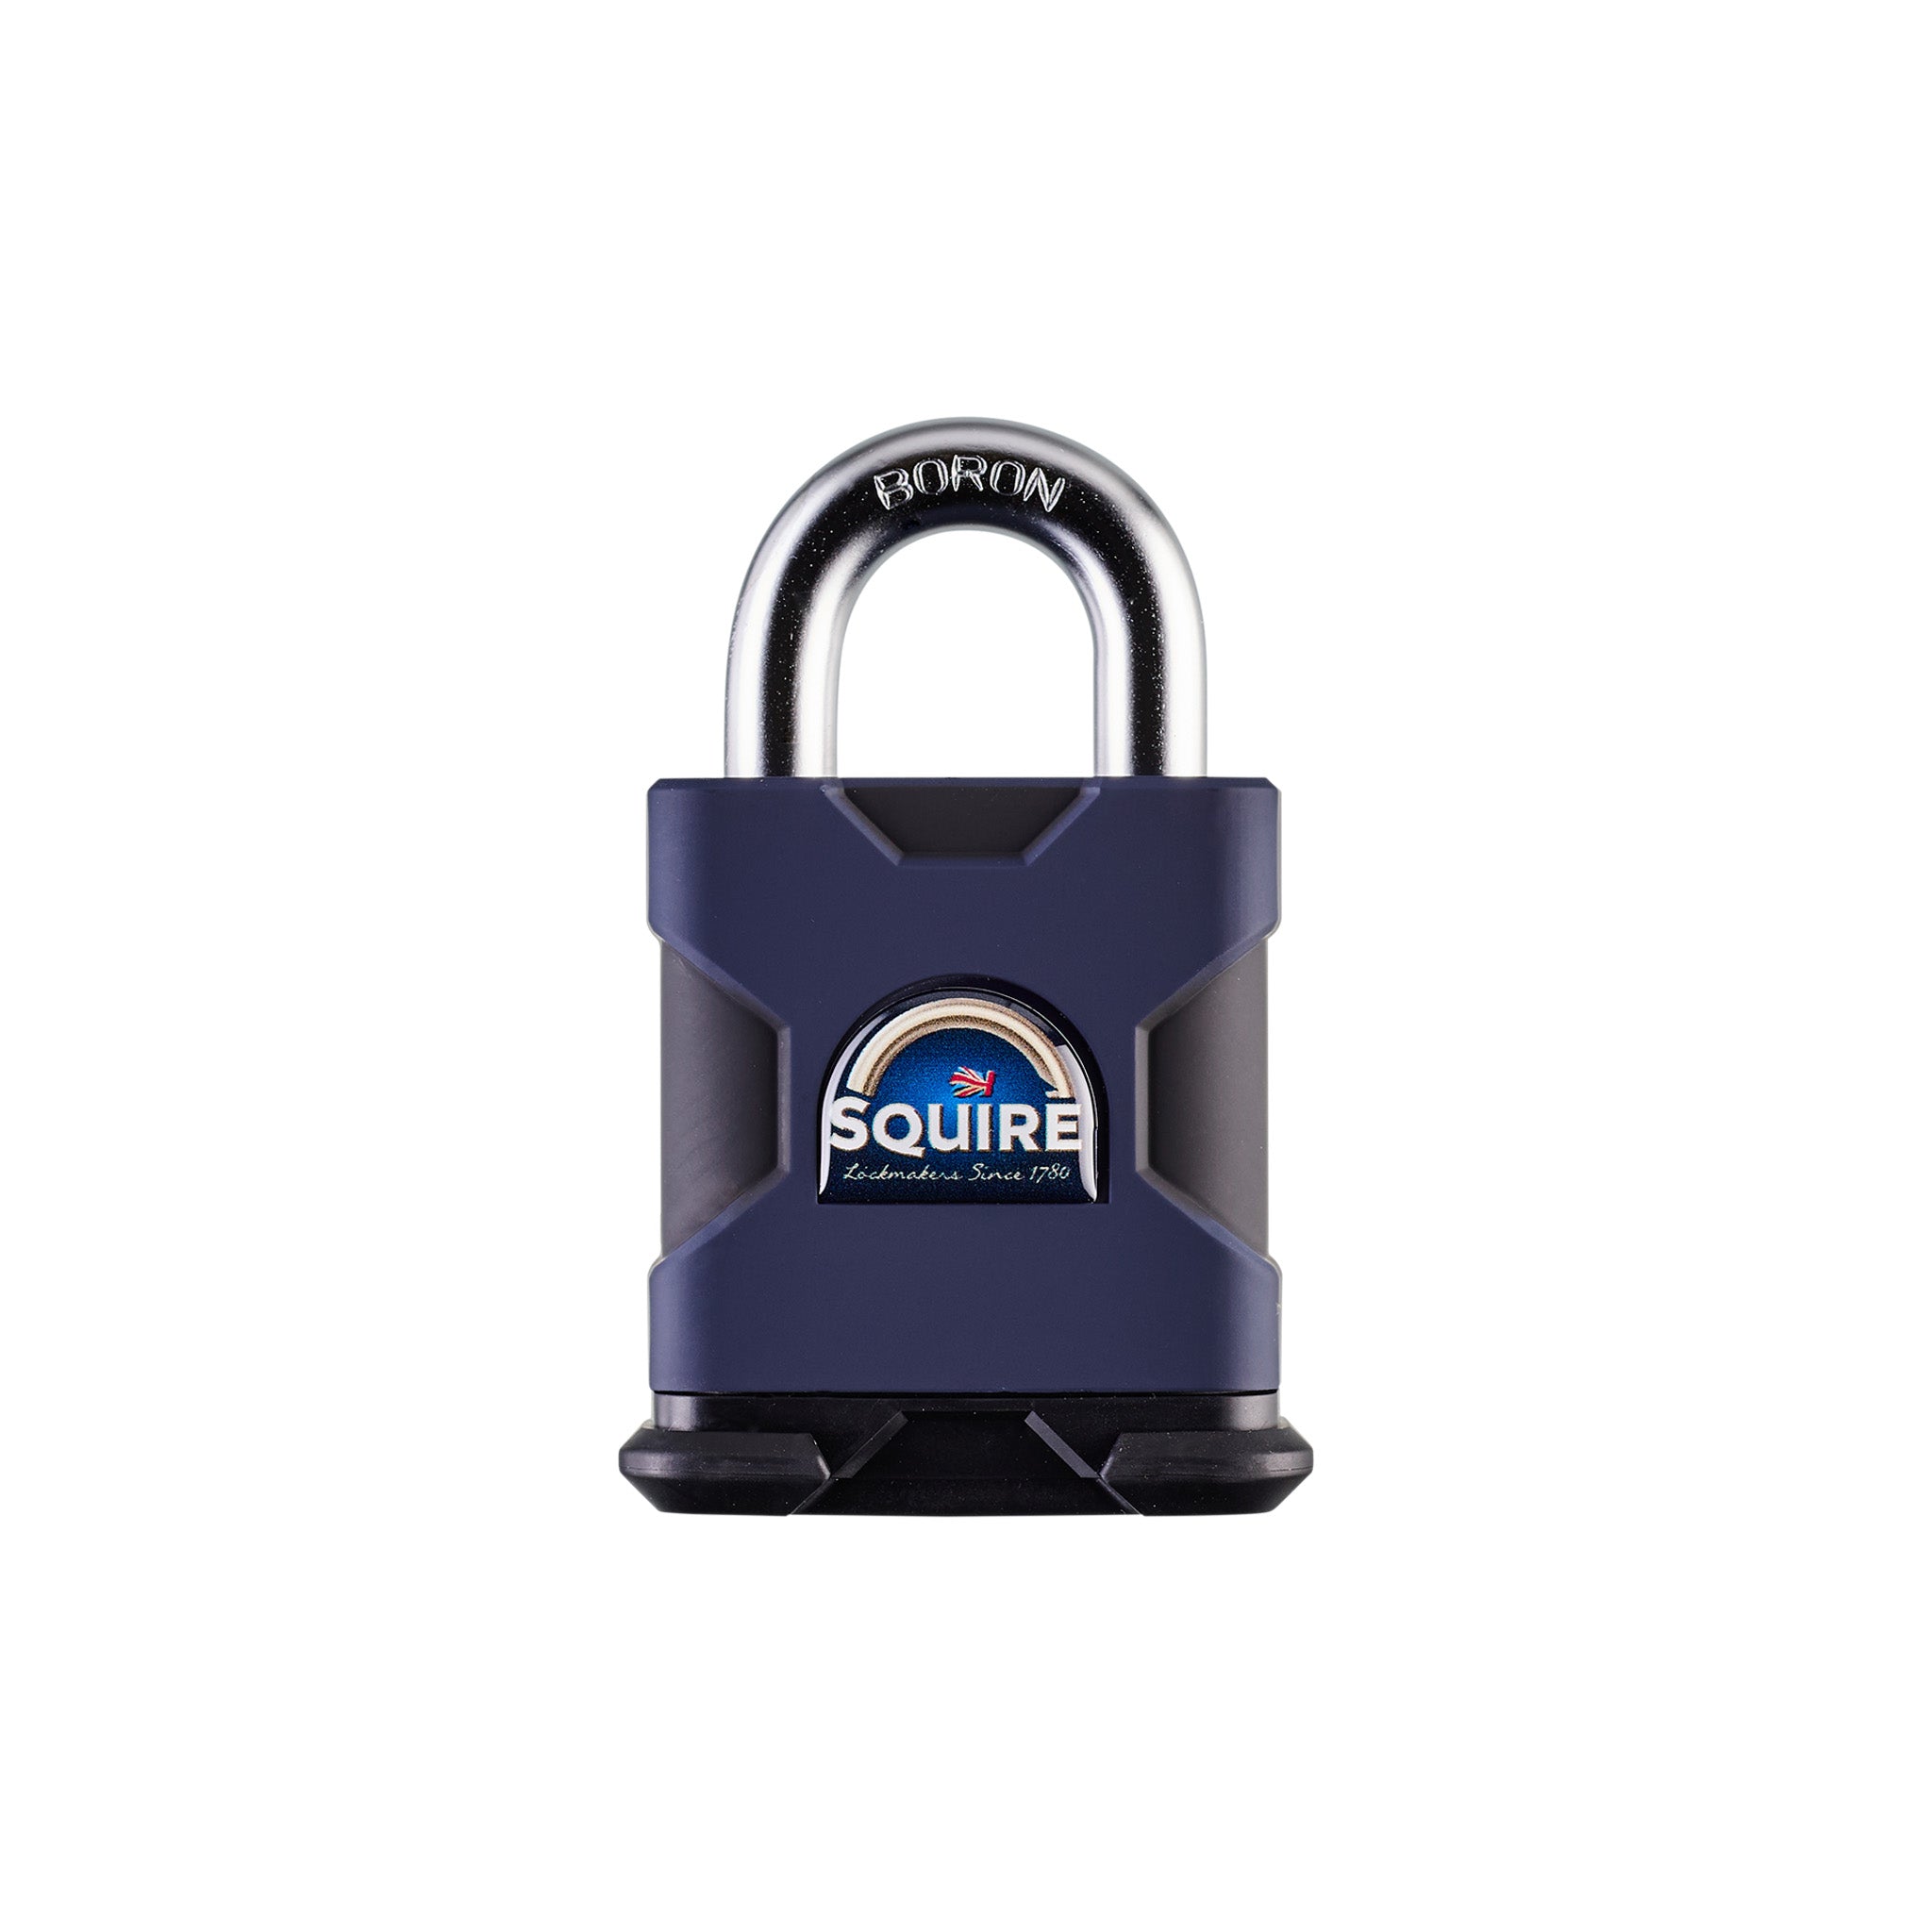 Squire Stronghold 50mm Hardened Steel Padlock - Open Shackle